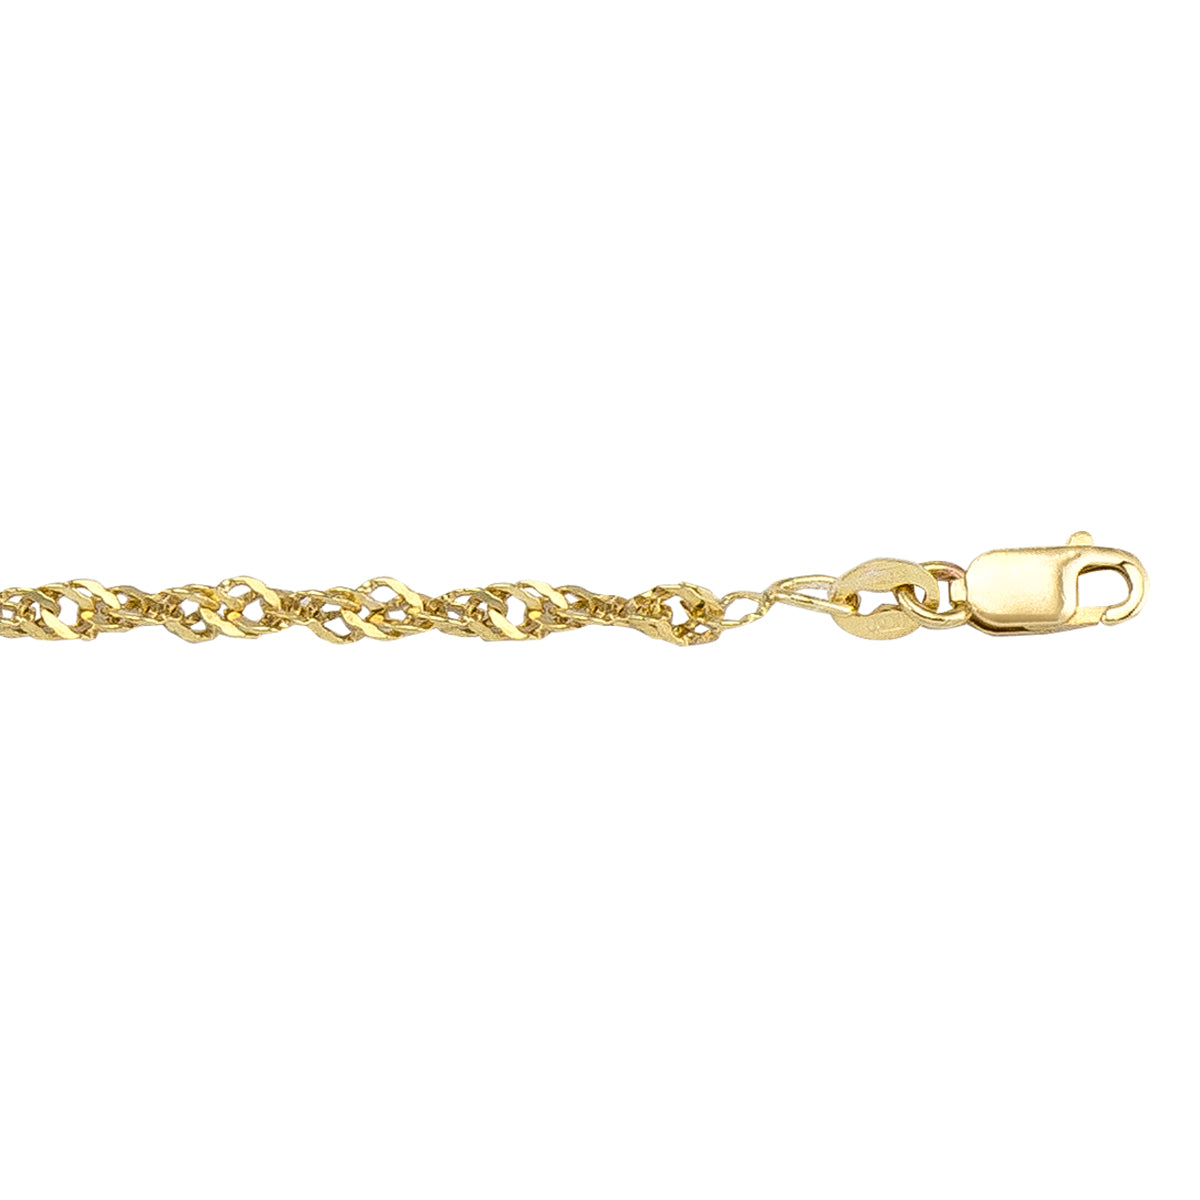 GOLD CHAIN YELLOW GOLD SOLID SINGAPORE LINK 